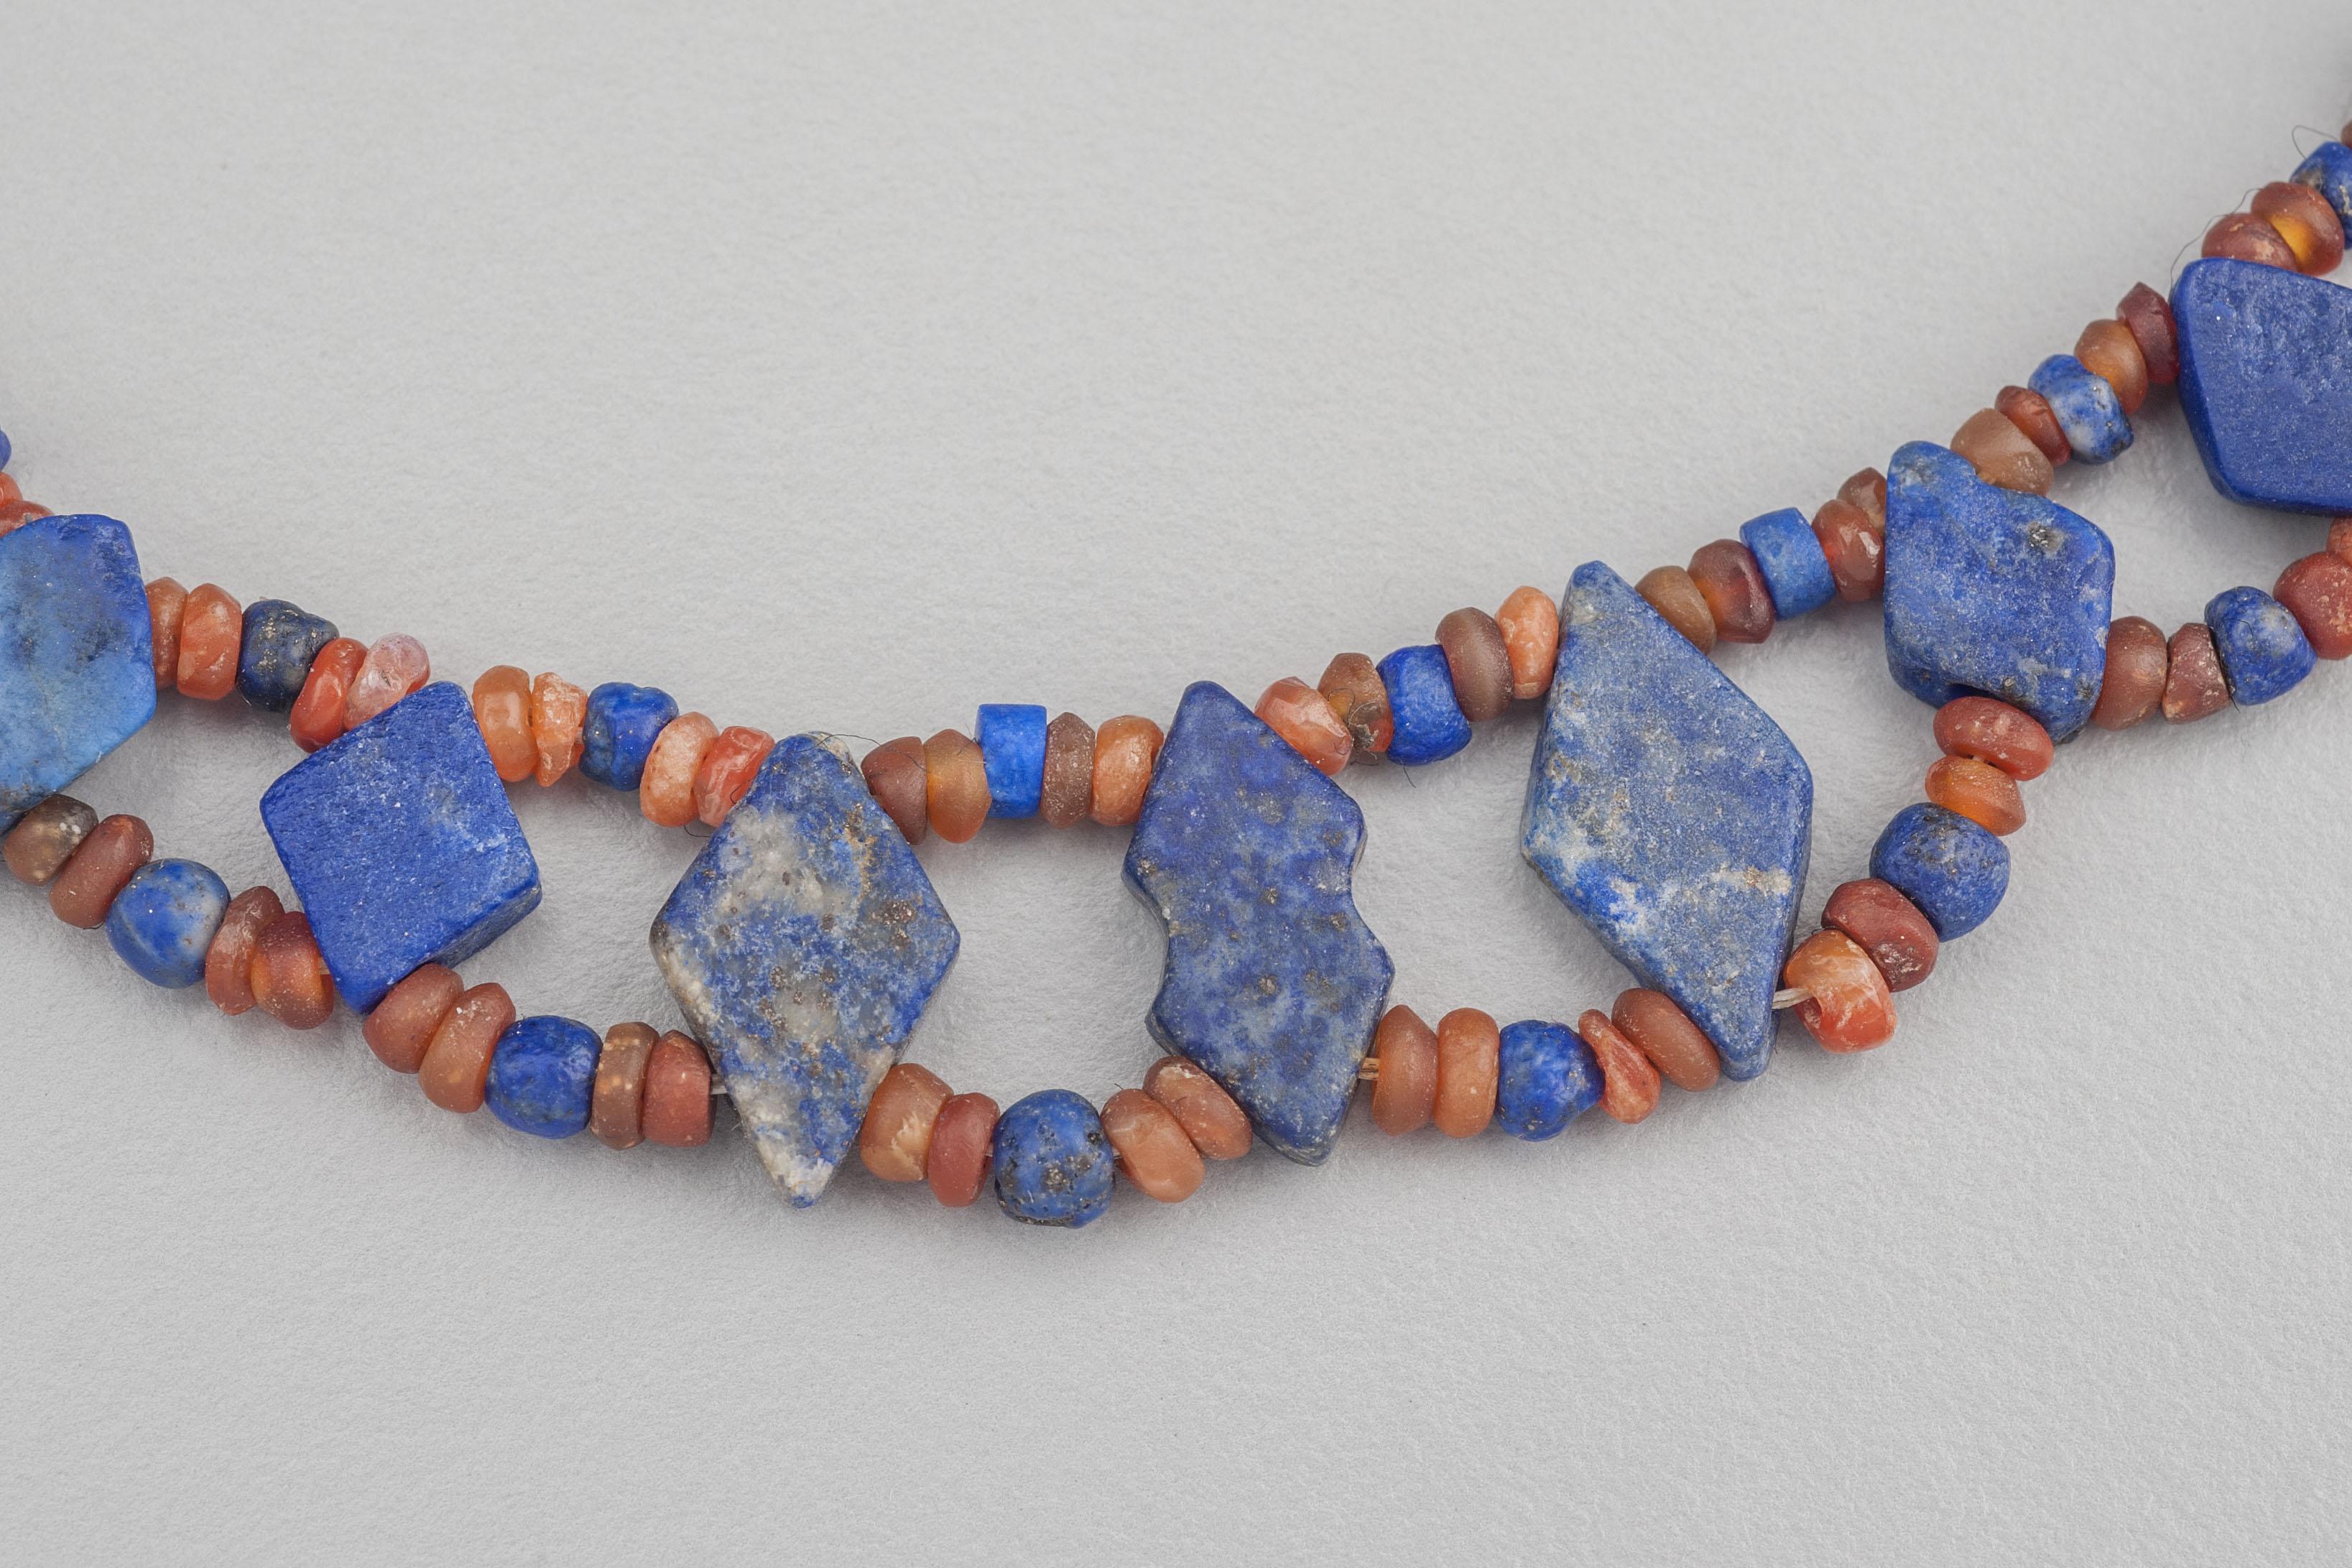 Thirty-three diamond shaped double-drilled lapis lazuli beads each of which is separated by two groups of four small carnelian beads with a lapis lazuli bead in the center. The diamond shaped lapis beads graduate slightly in size towards the back of